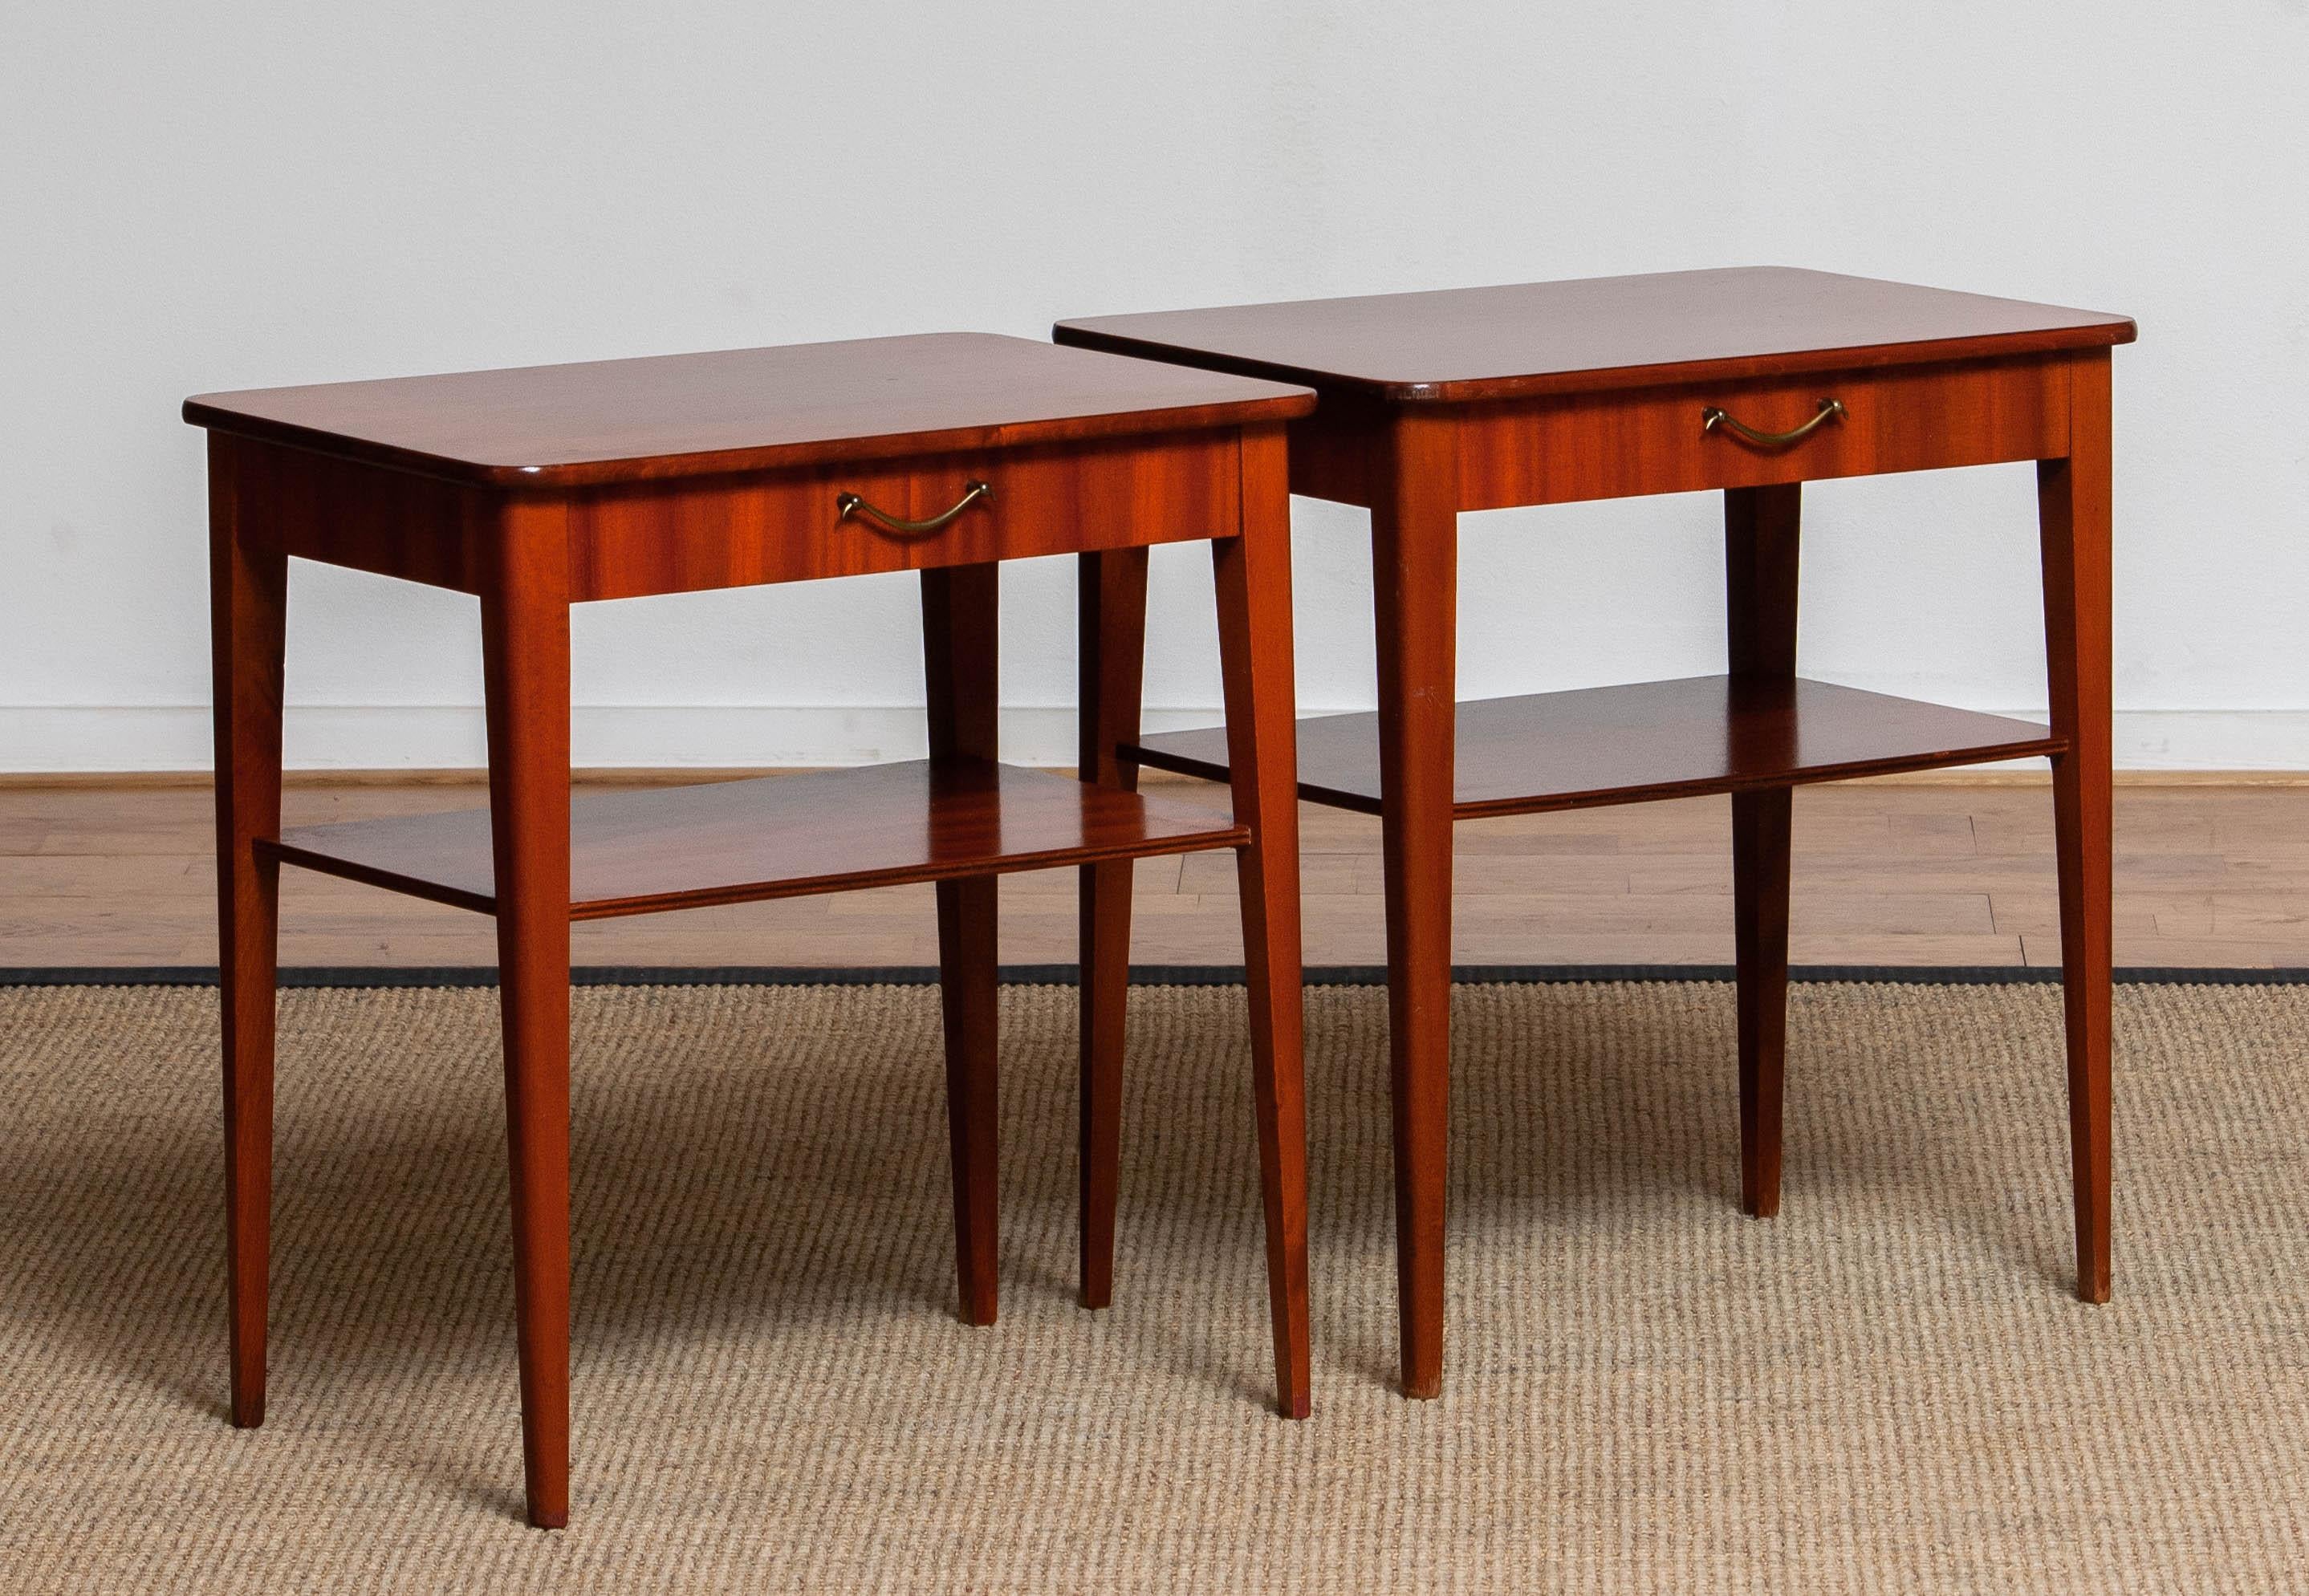 Set of two slim Swedish bedside tables / night stands in mahogany both with a drawer and a shelf. 
Made in the 1960's and in overall good condition.